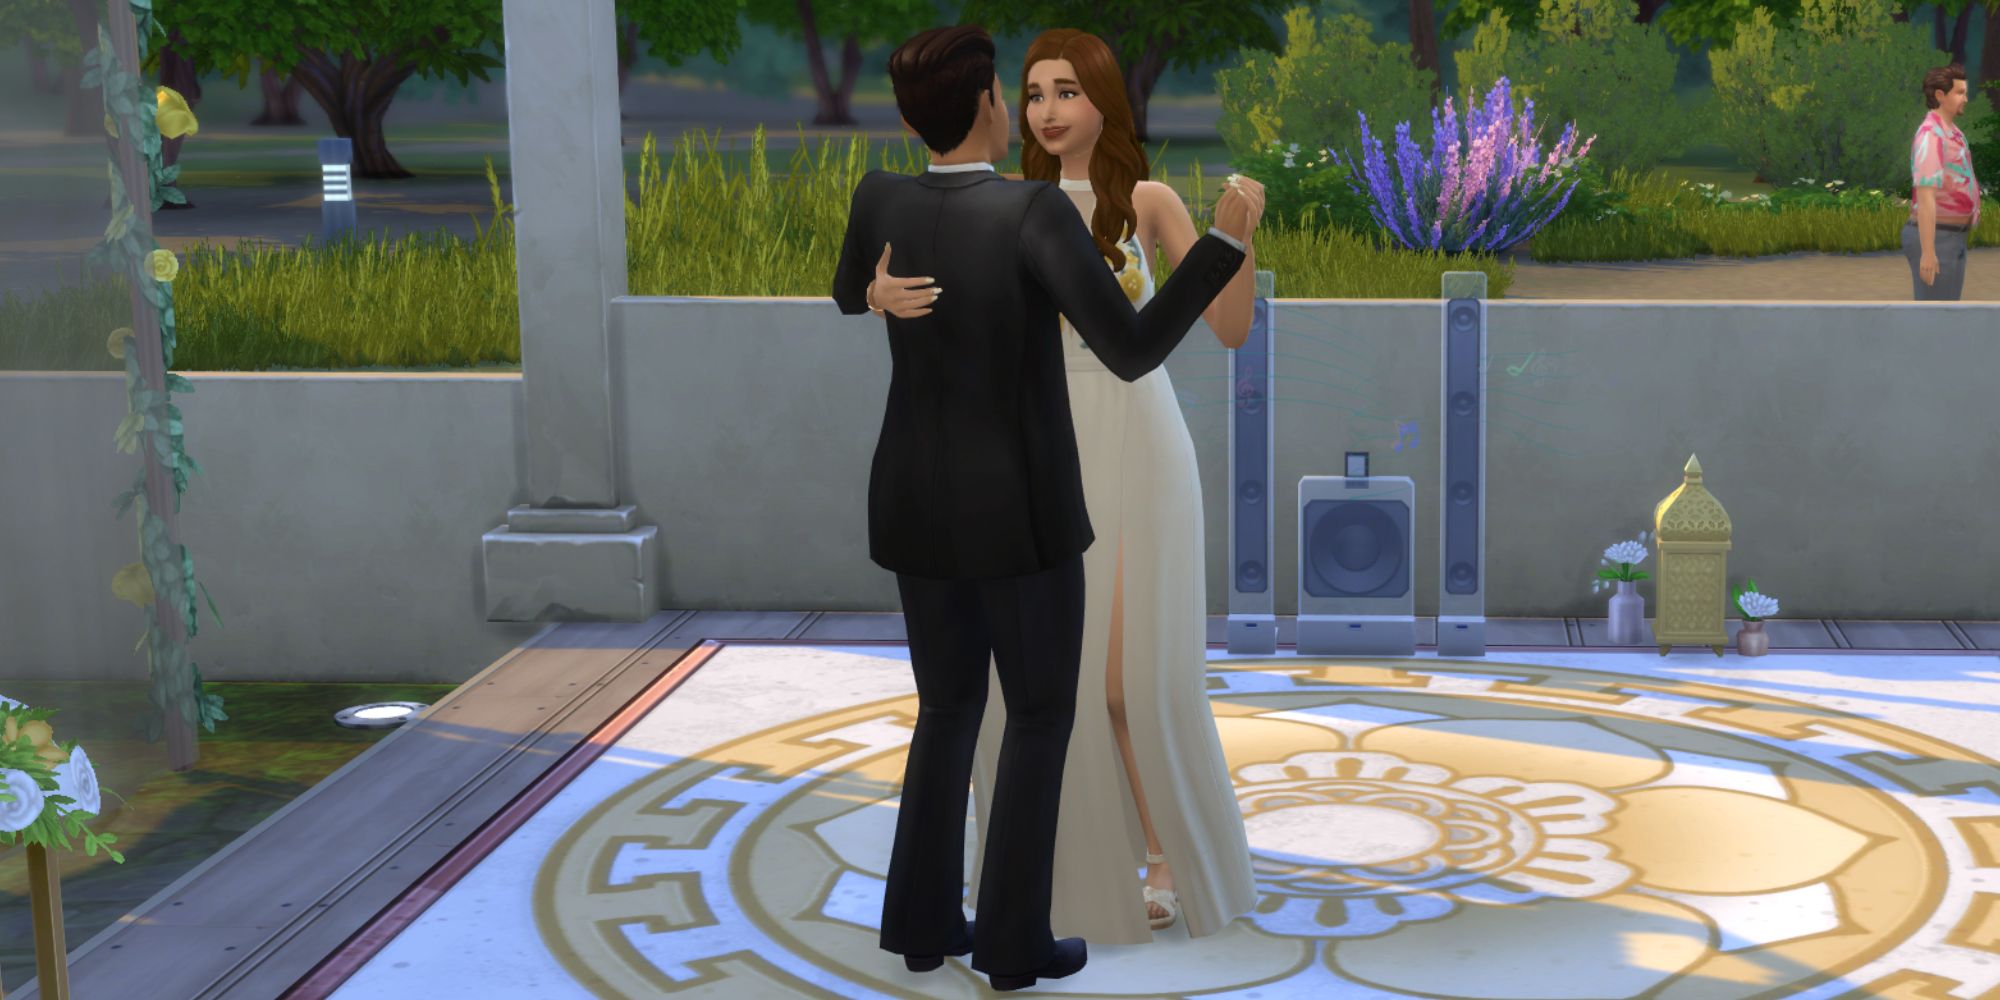 A bride and groom slow dancing in their wedding